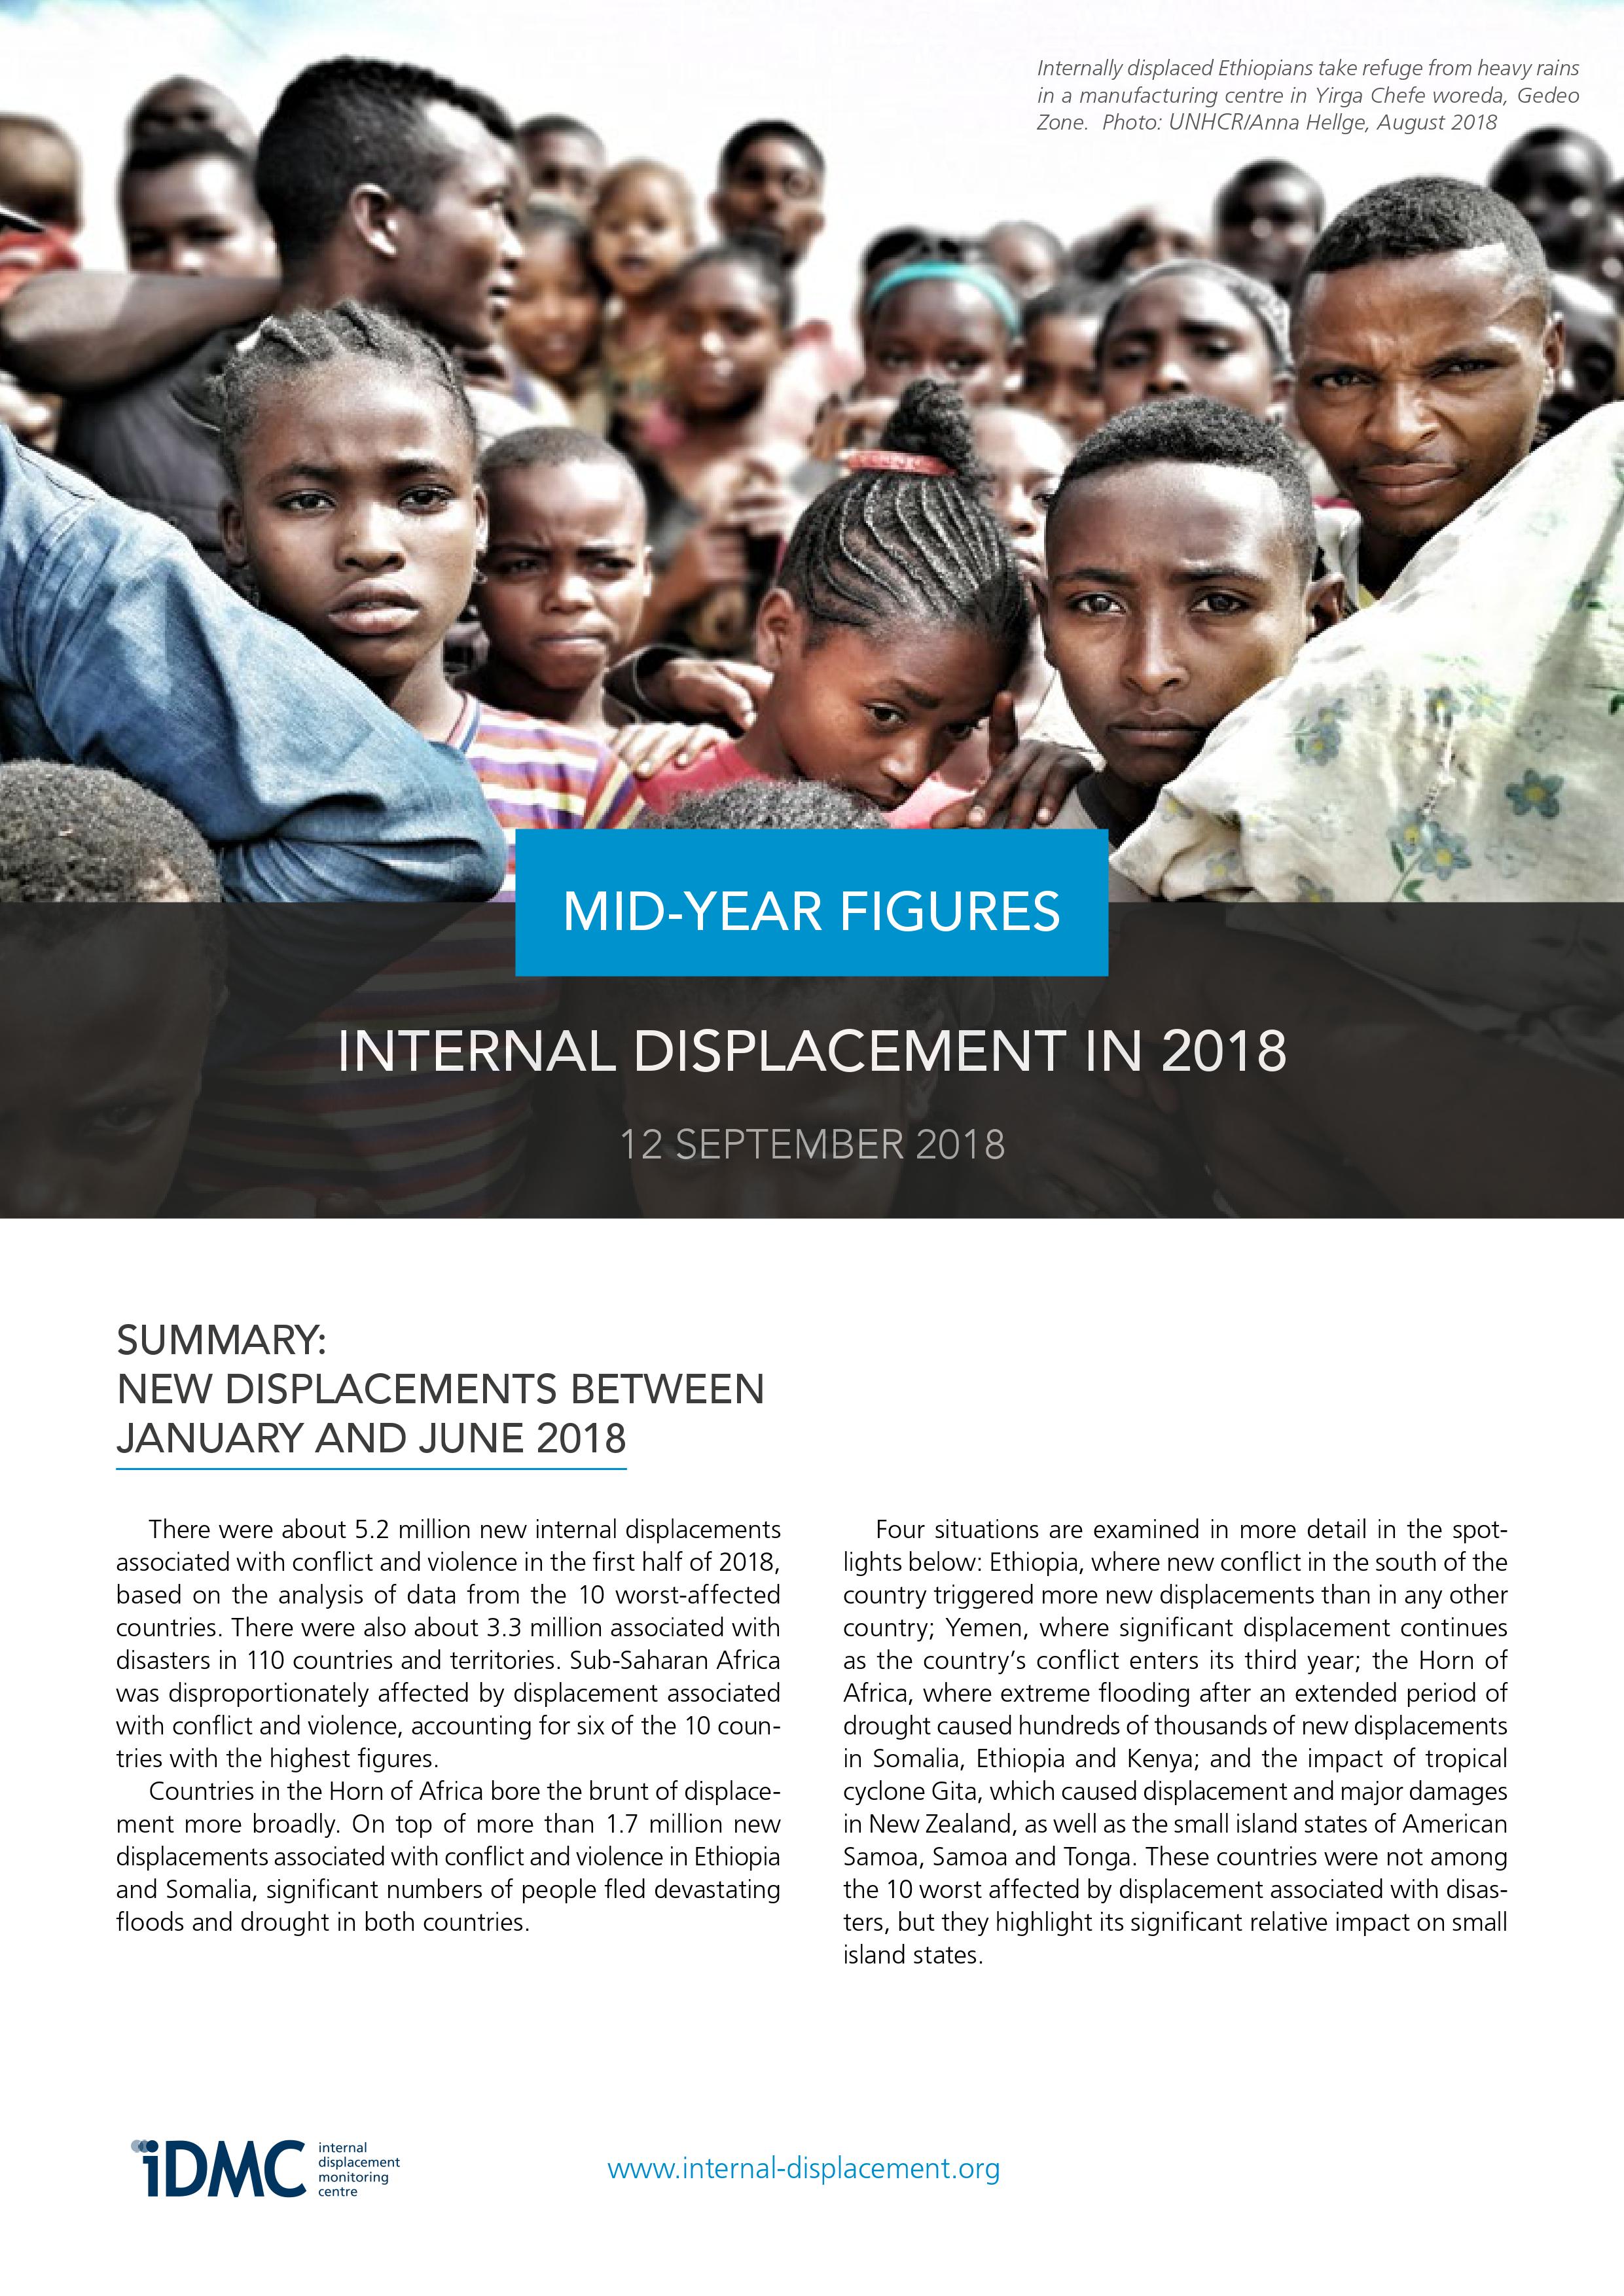 Internal displacement mid-year figures (January - June 2018)